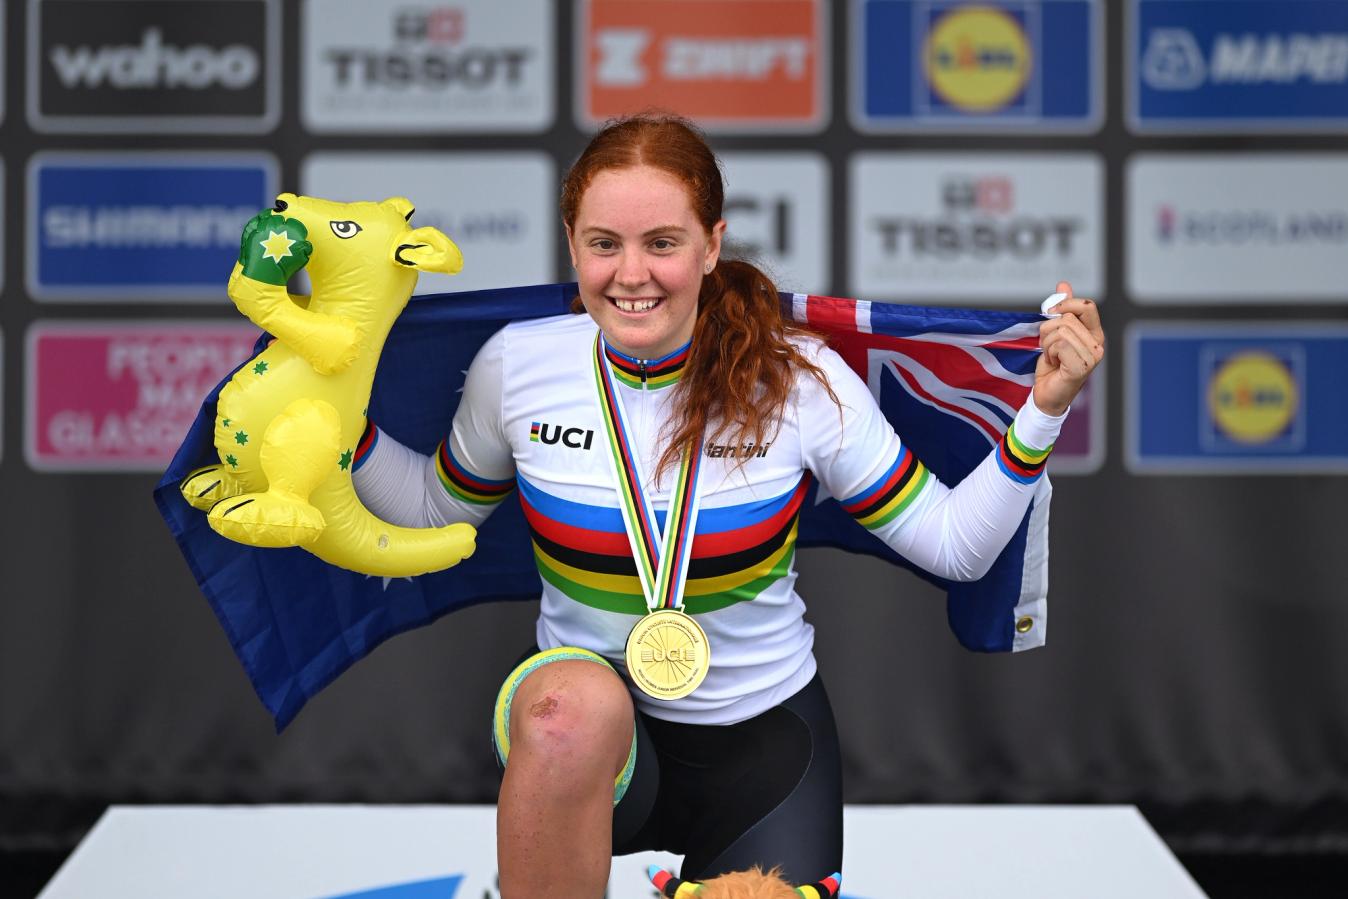 Felicity Wilson-Haffenden celebrates winning the gold medal in the Junior Time Trial at the recent World Championships 